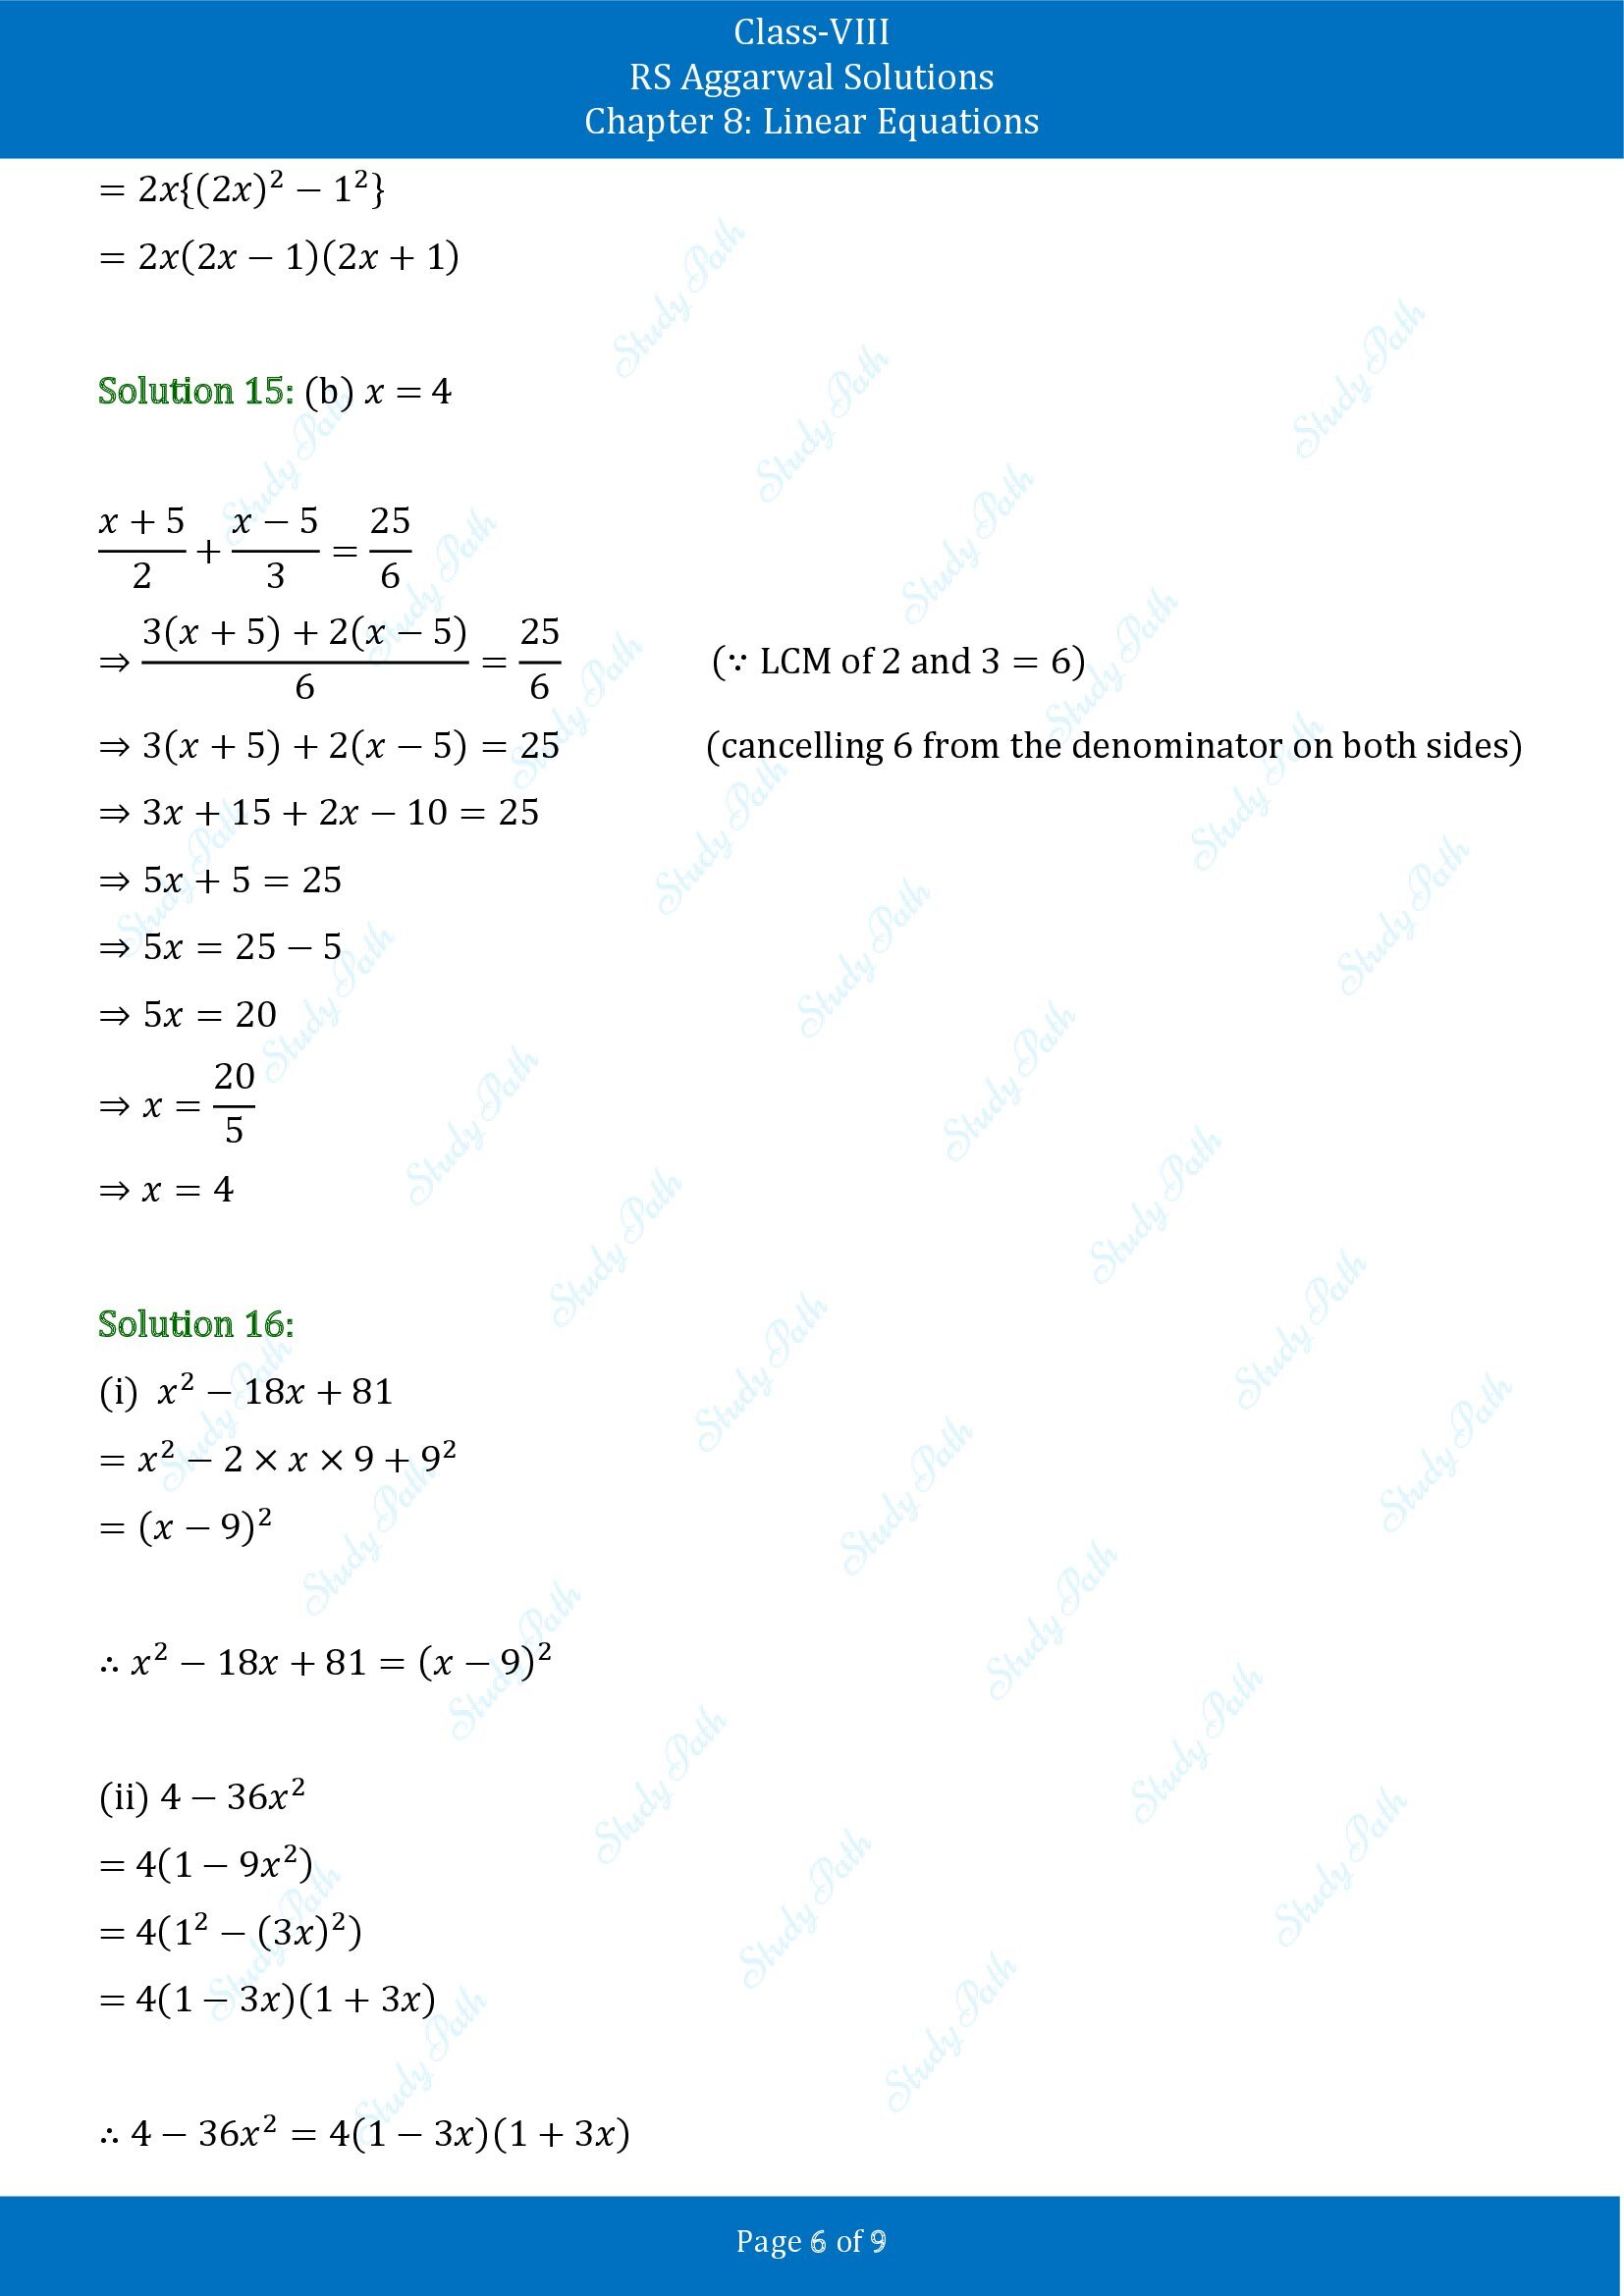 RS Aggarwal Solutions Class 8 Chapter 8 Linear Equations Test Paper 00006